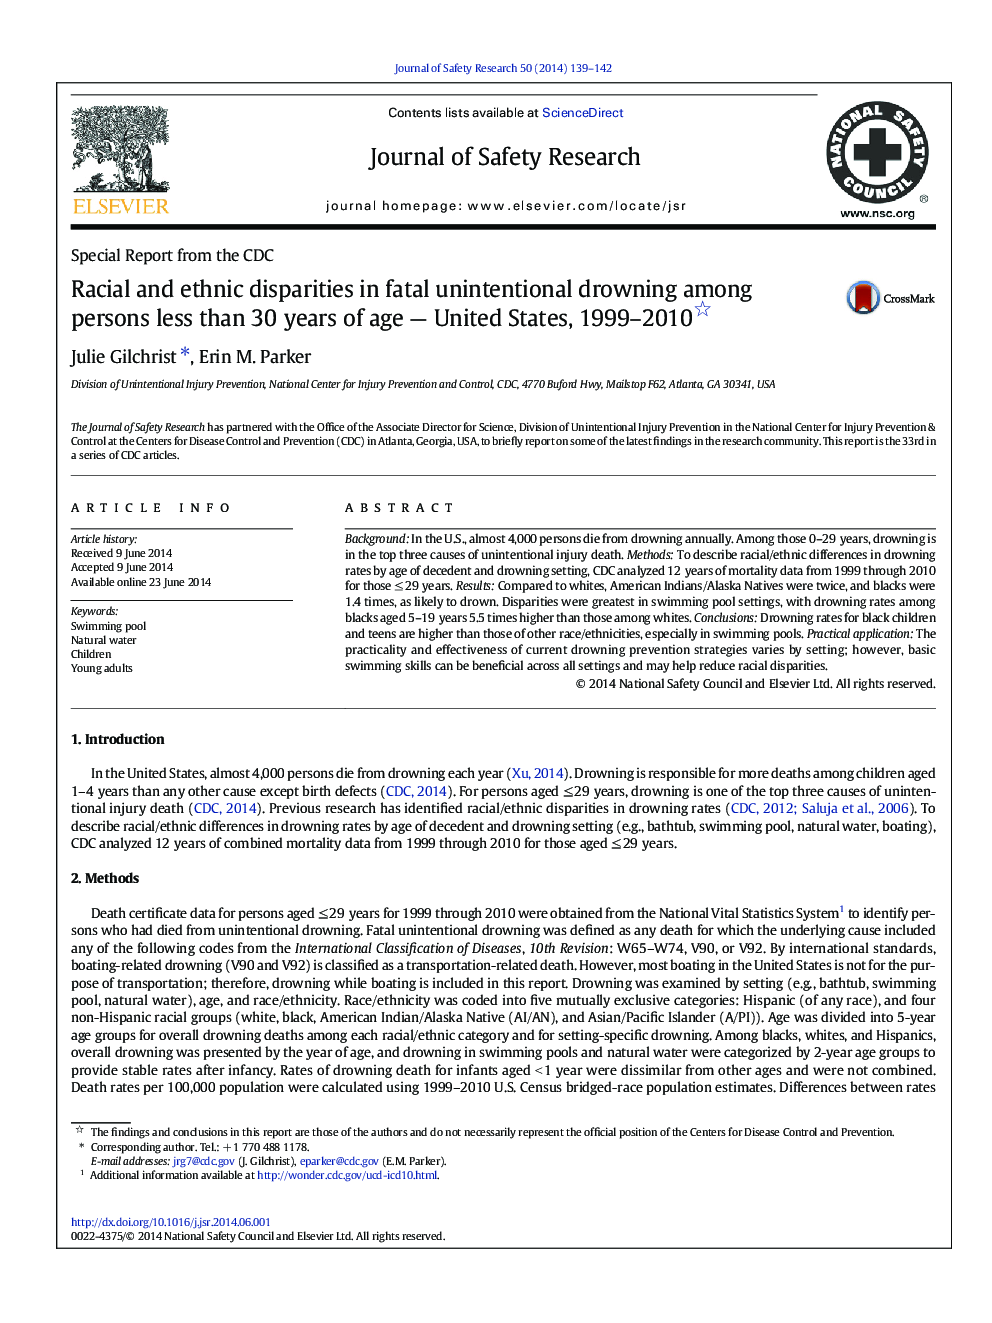 Racial and ethnic disparities in fatal unintentional drowning among persons less than 30 years of age — United States, 1999–2010 